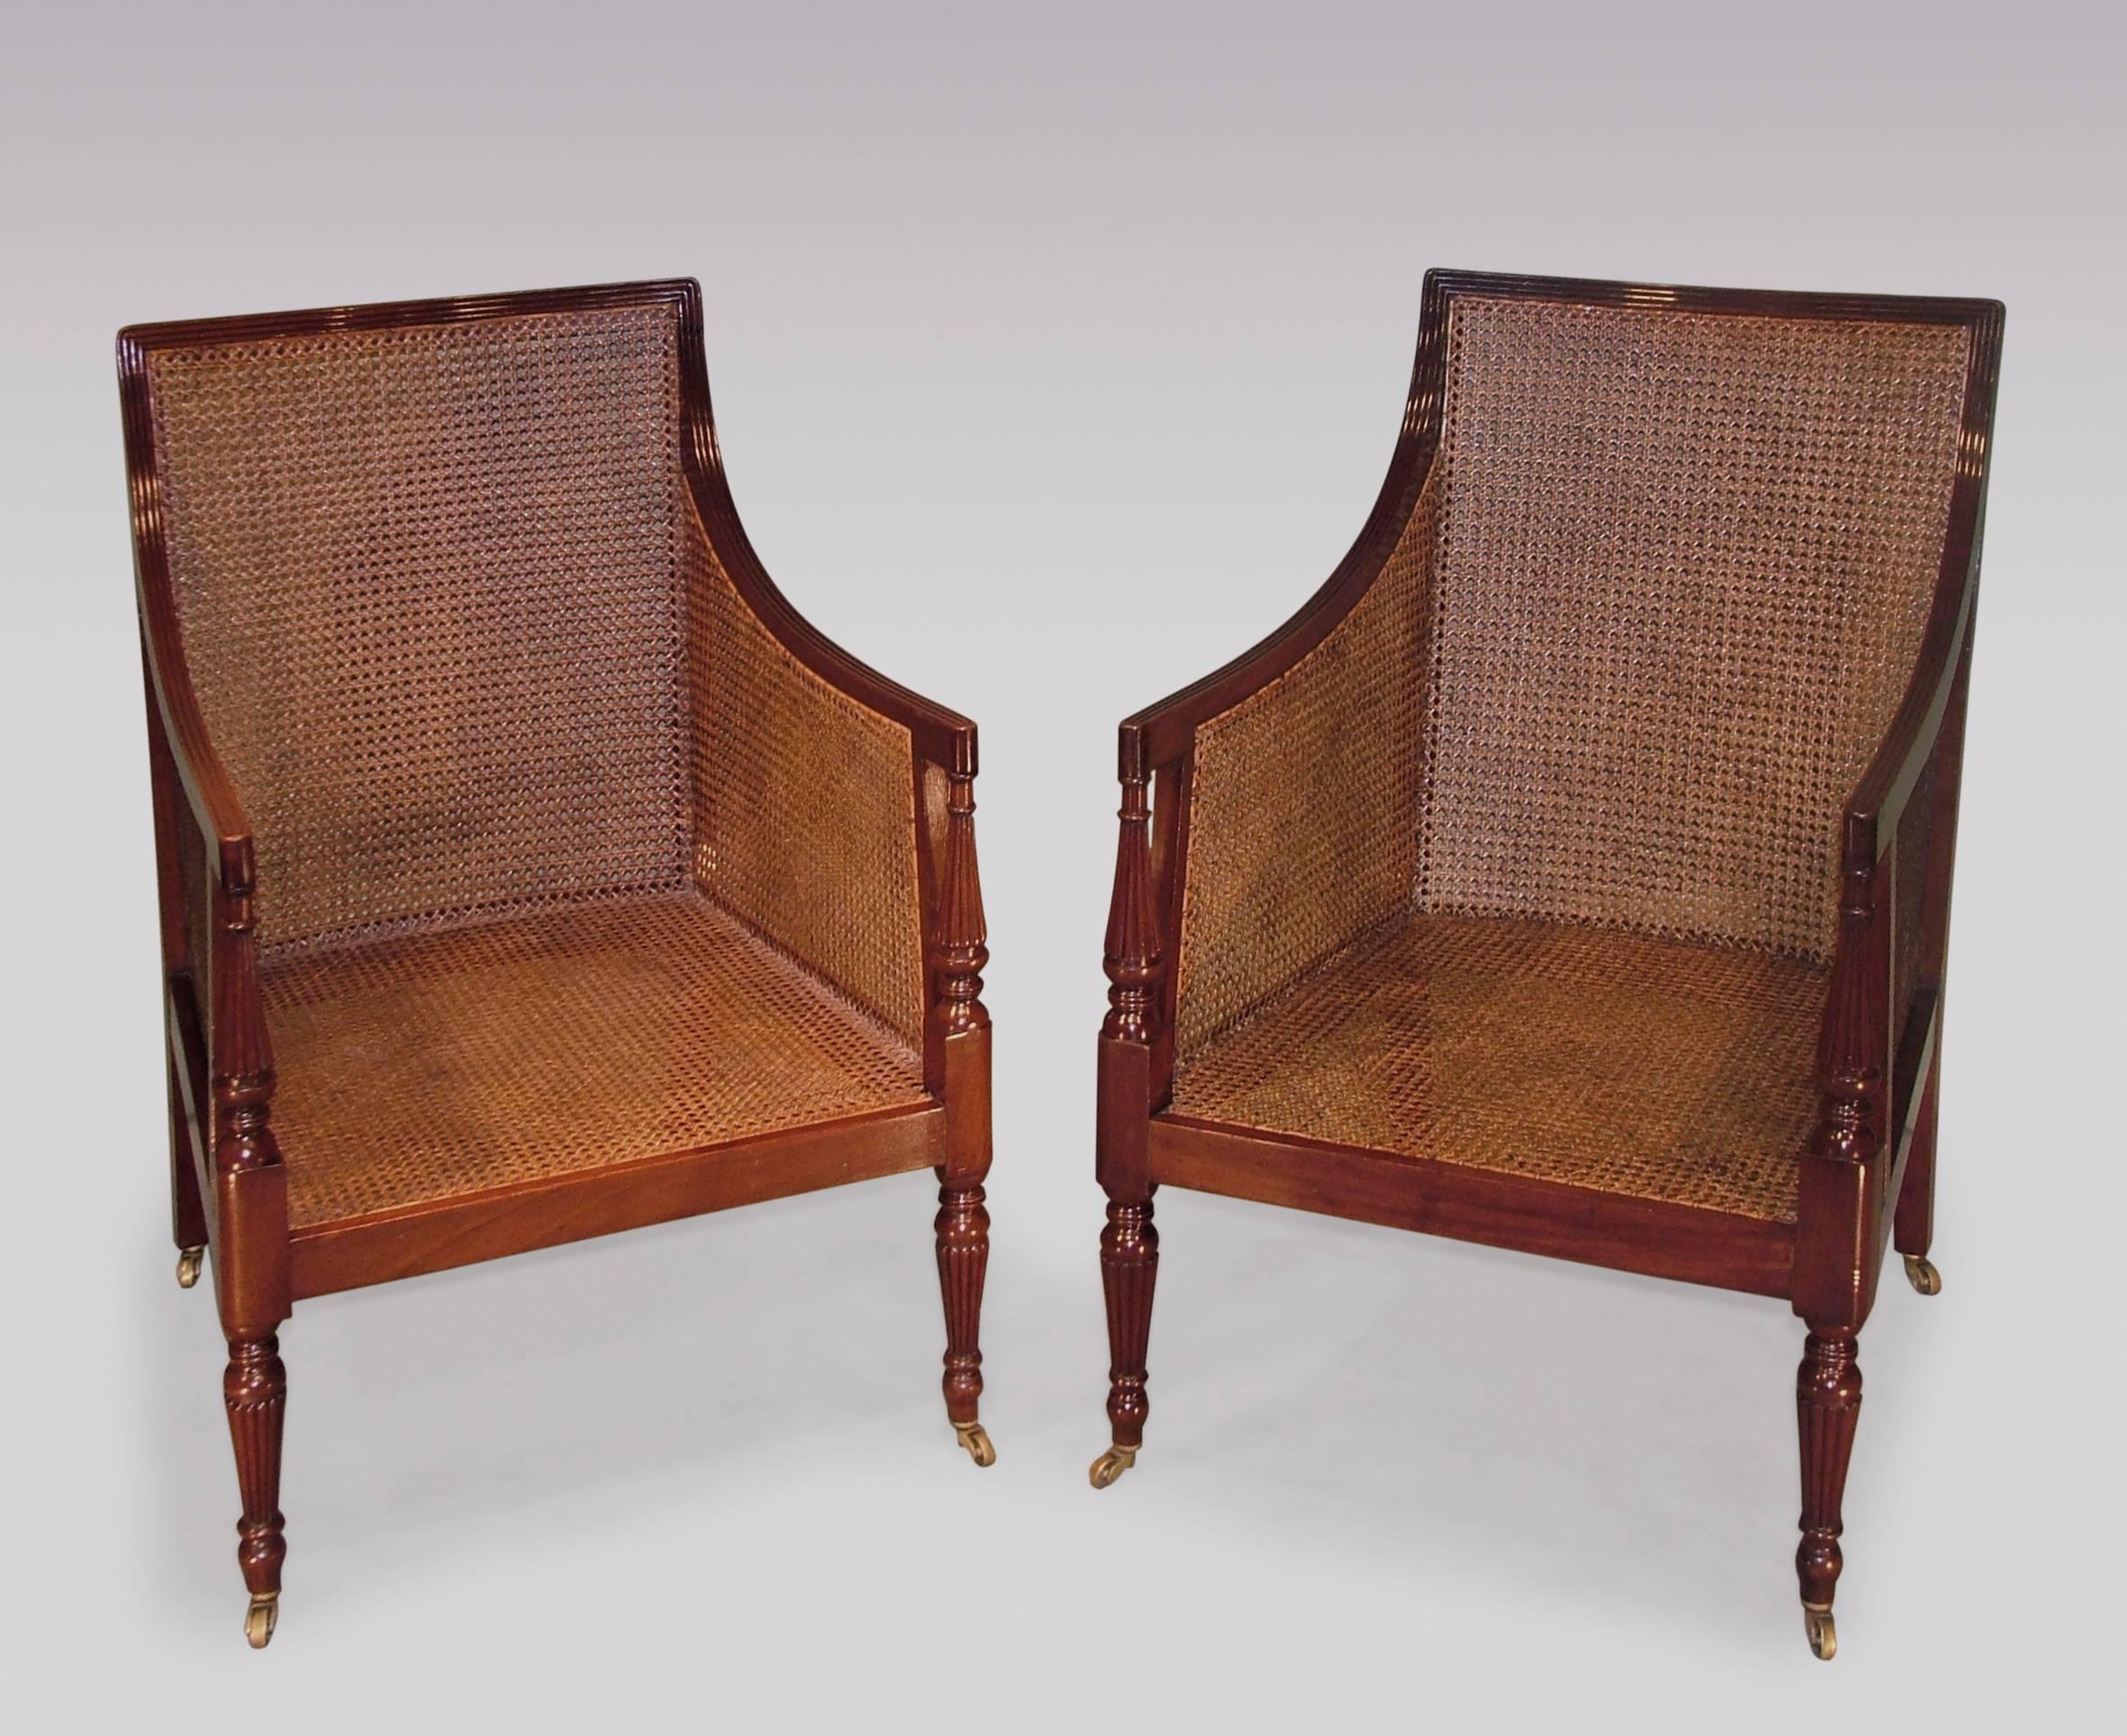 A near pair of early 19th century Regency period mahogany caned library bergere chairs, having receded backs and arms, above turned, tapering and receded arm supports and legs, ending on brass castors.